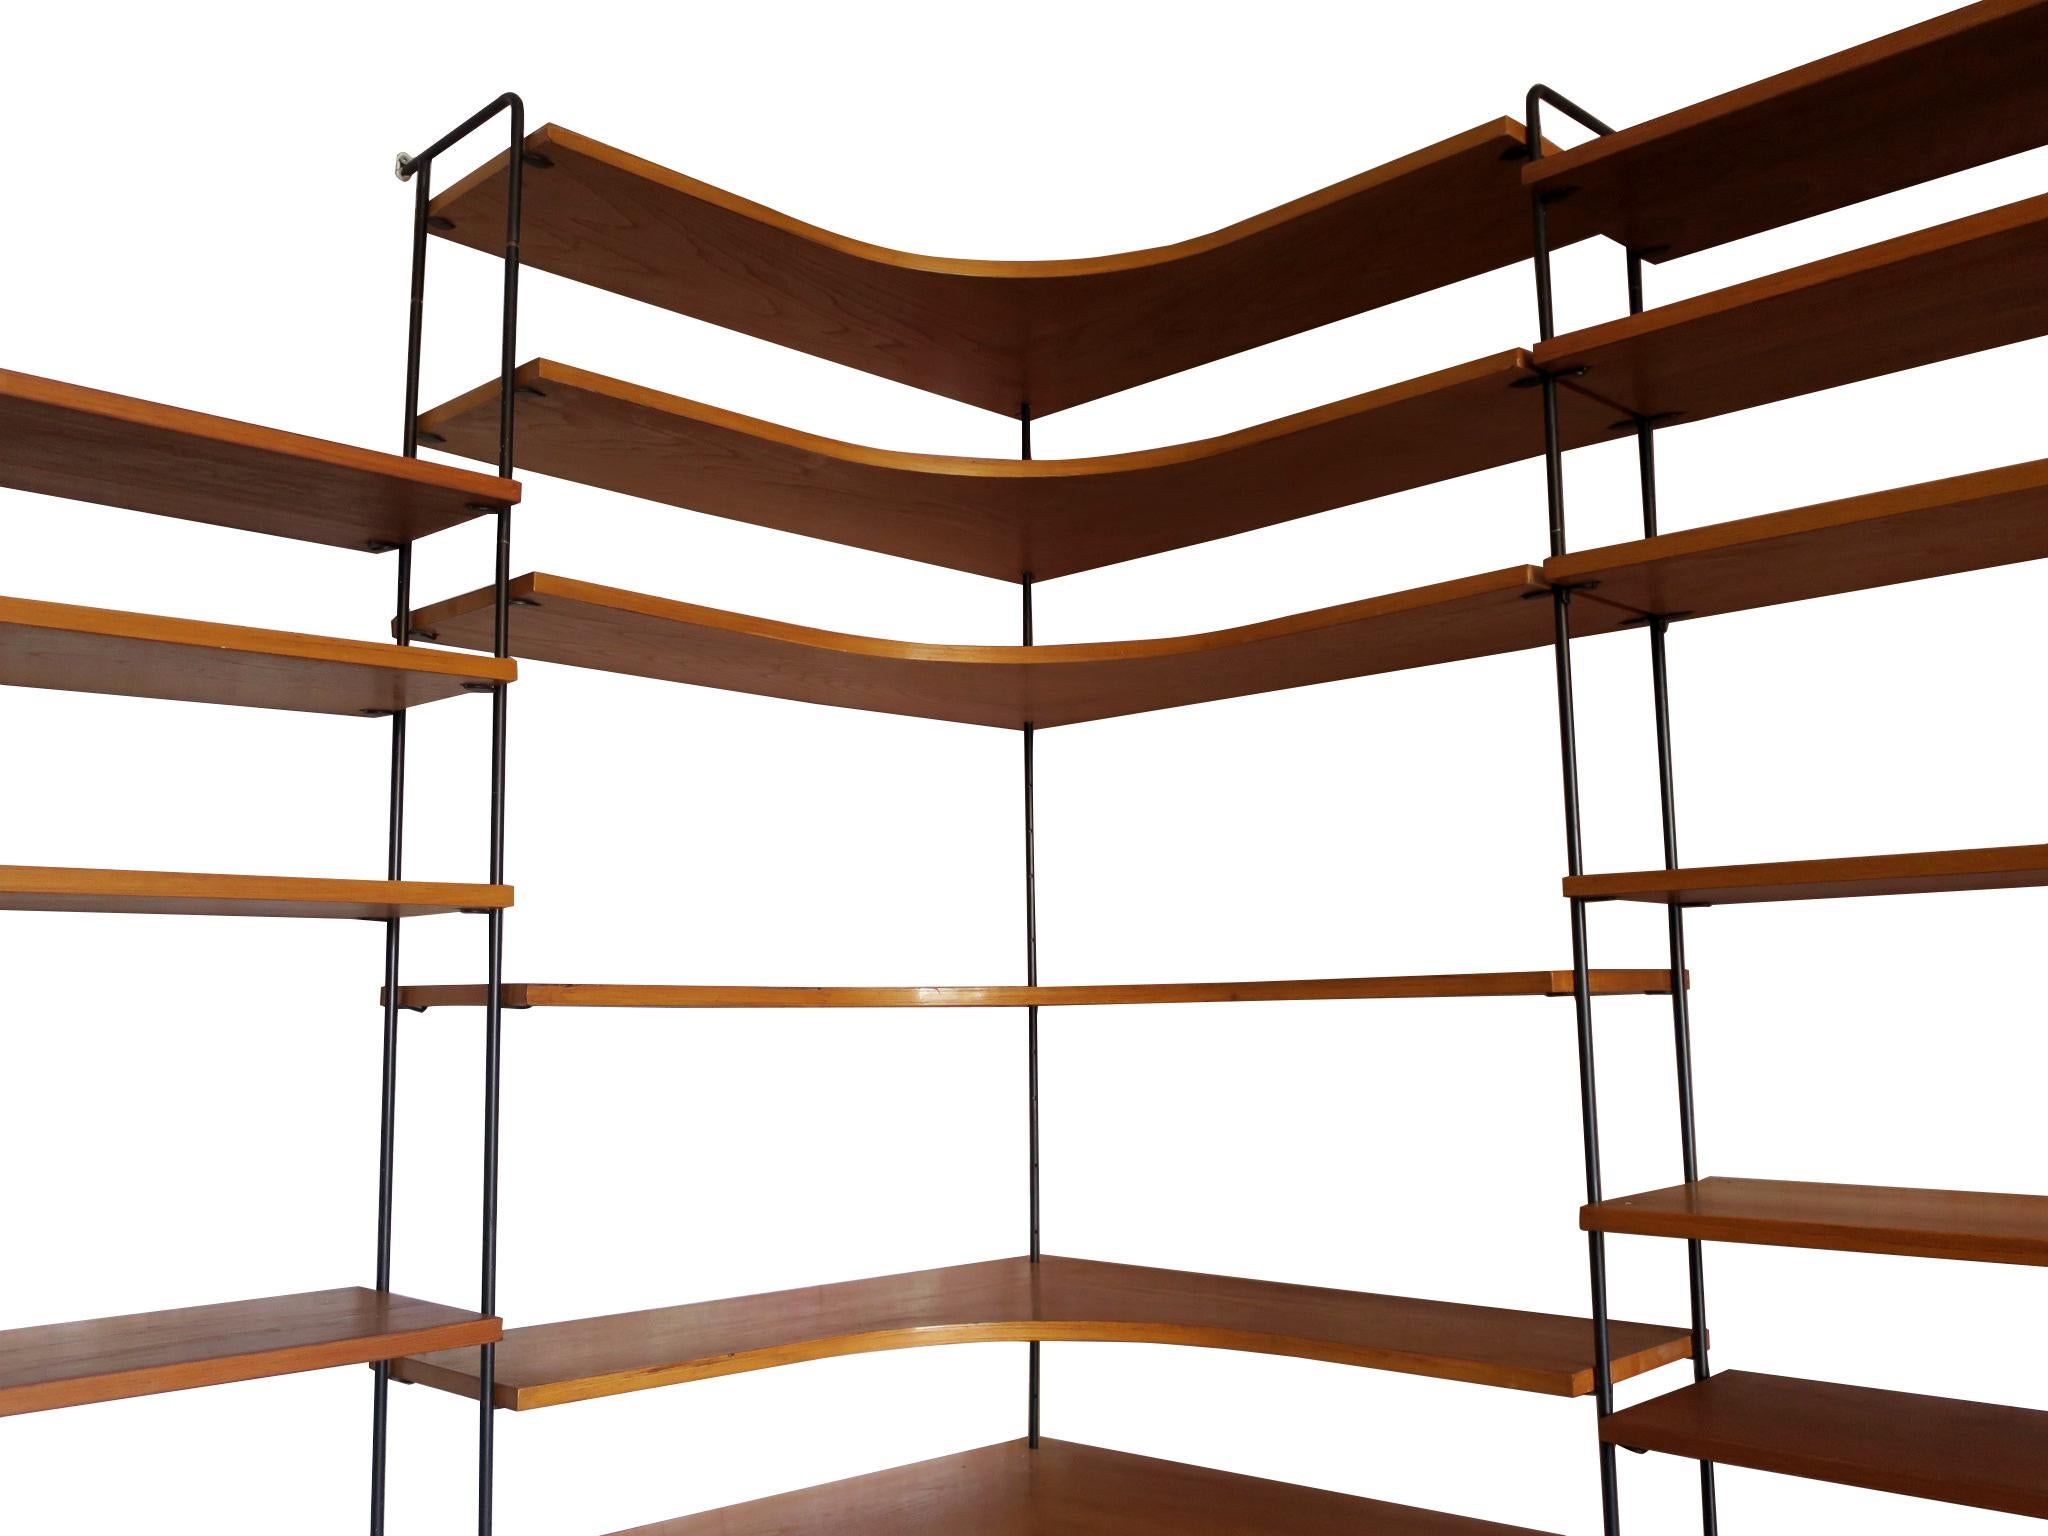 Fine Scandinavian modular wall shelf system on slender black metal supports, stabilized by wall screws. The shelves can be hung at will, held by small metal hooked pegs placed in the numerous small holes in the metal supports, a simple and elegant